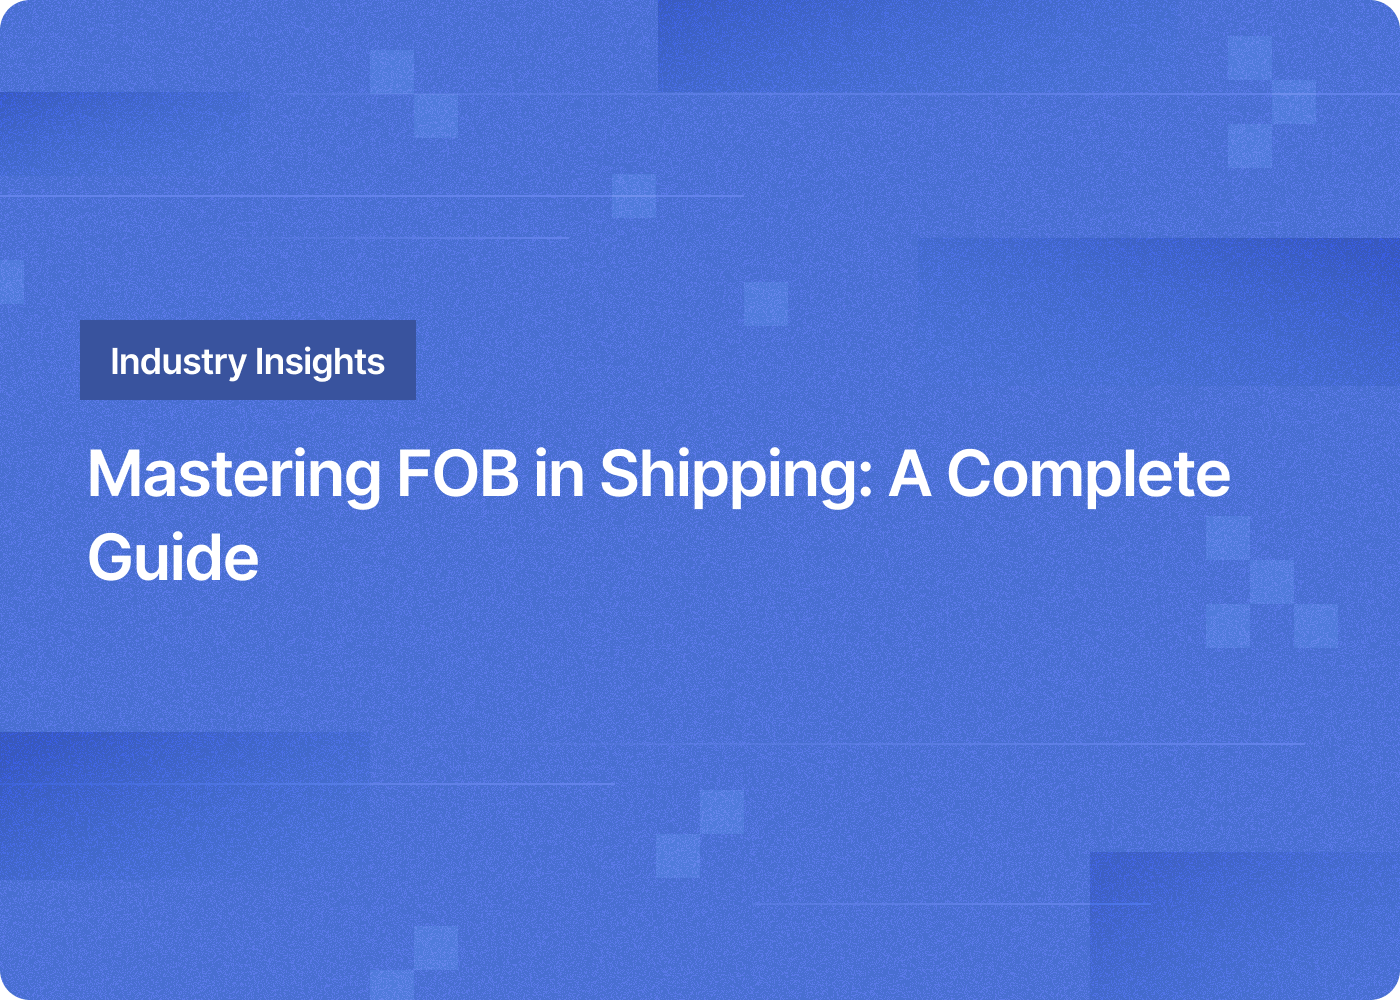 Free on Board (FOB) Explained: Who's Liable for What in Shipping?